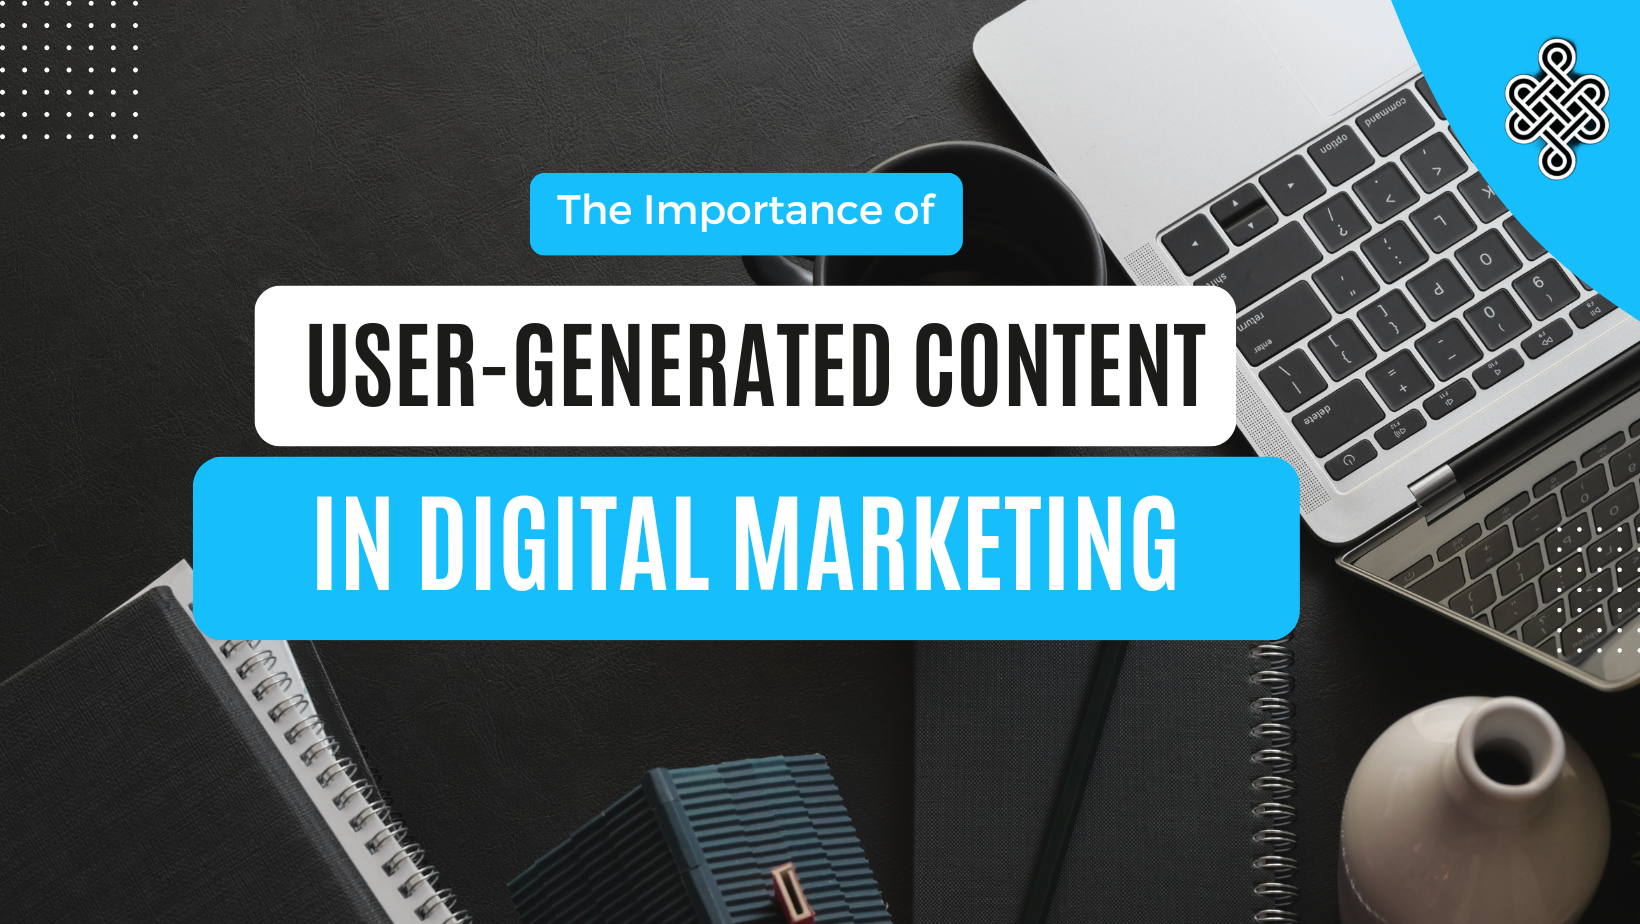 The Importance of User-Generated Content in Digital Marketing | Learn How UGC Can Benefit Your Business